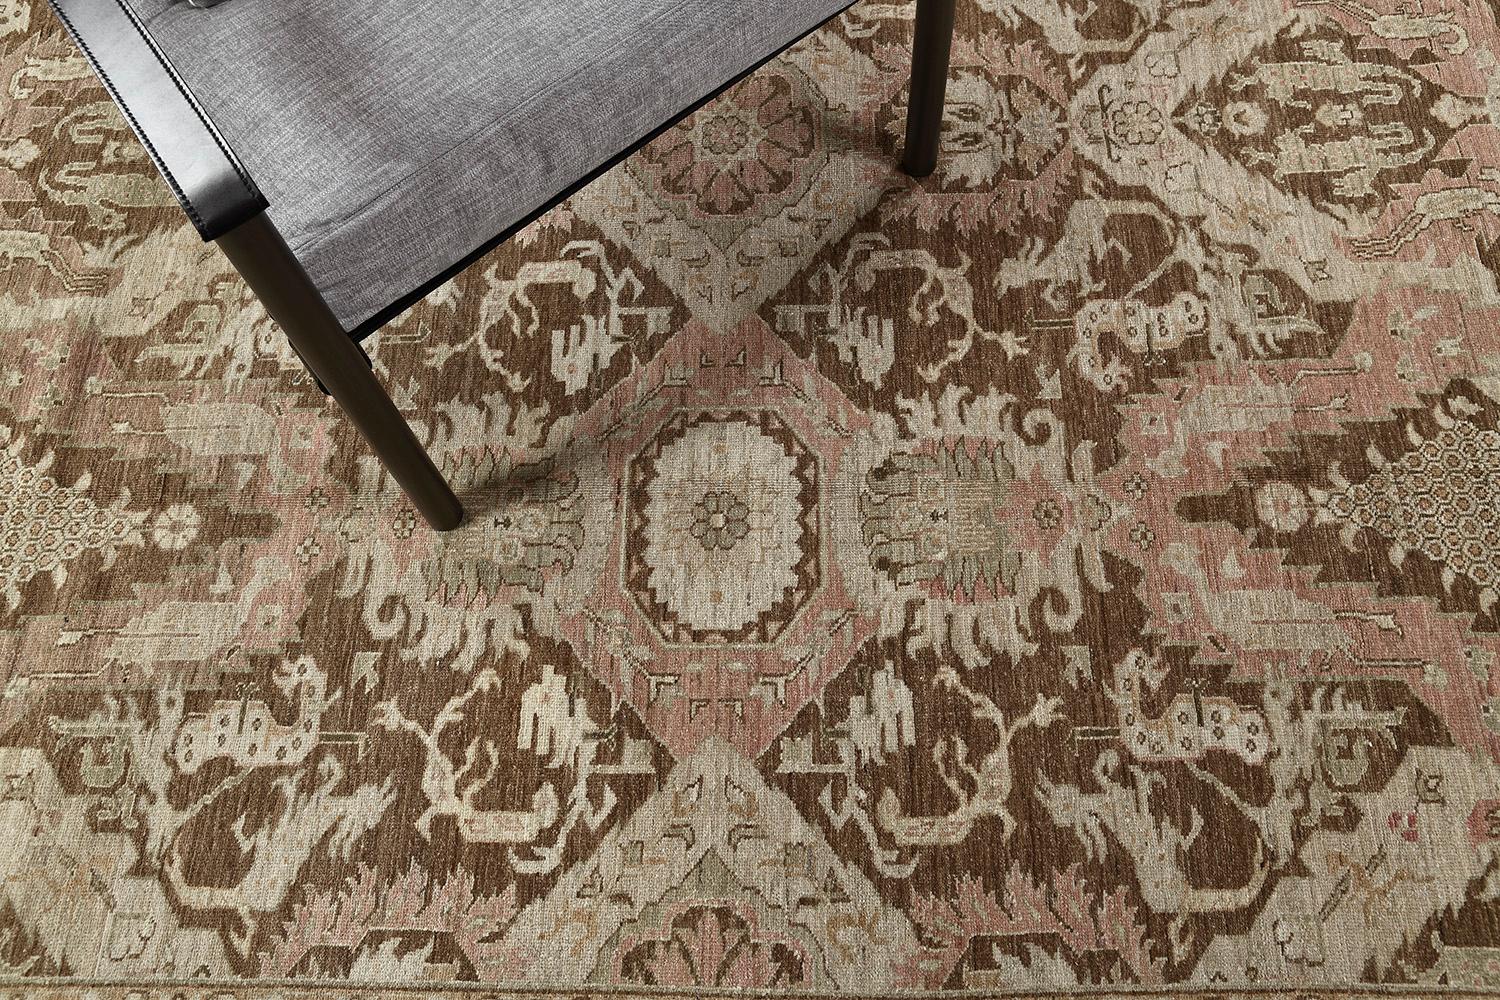 A meticulous repetition in the design of the Arts & Crafts rug makes it more stylish than ever. Muted color combinations of blush accents to neutral tones in graceful patterns. These rugs were regularly used in several connecting spaces. It is